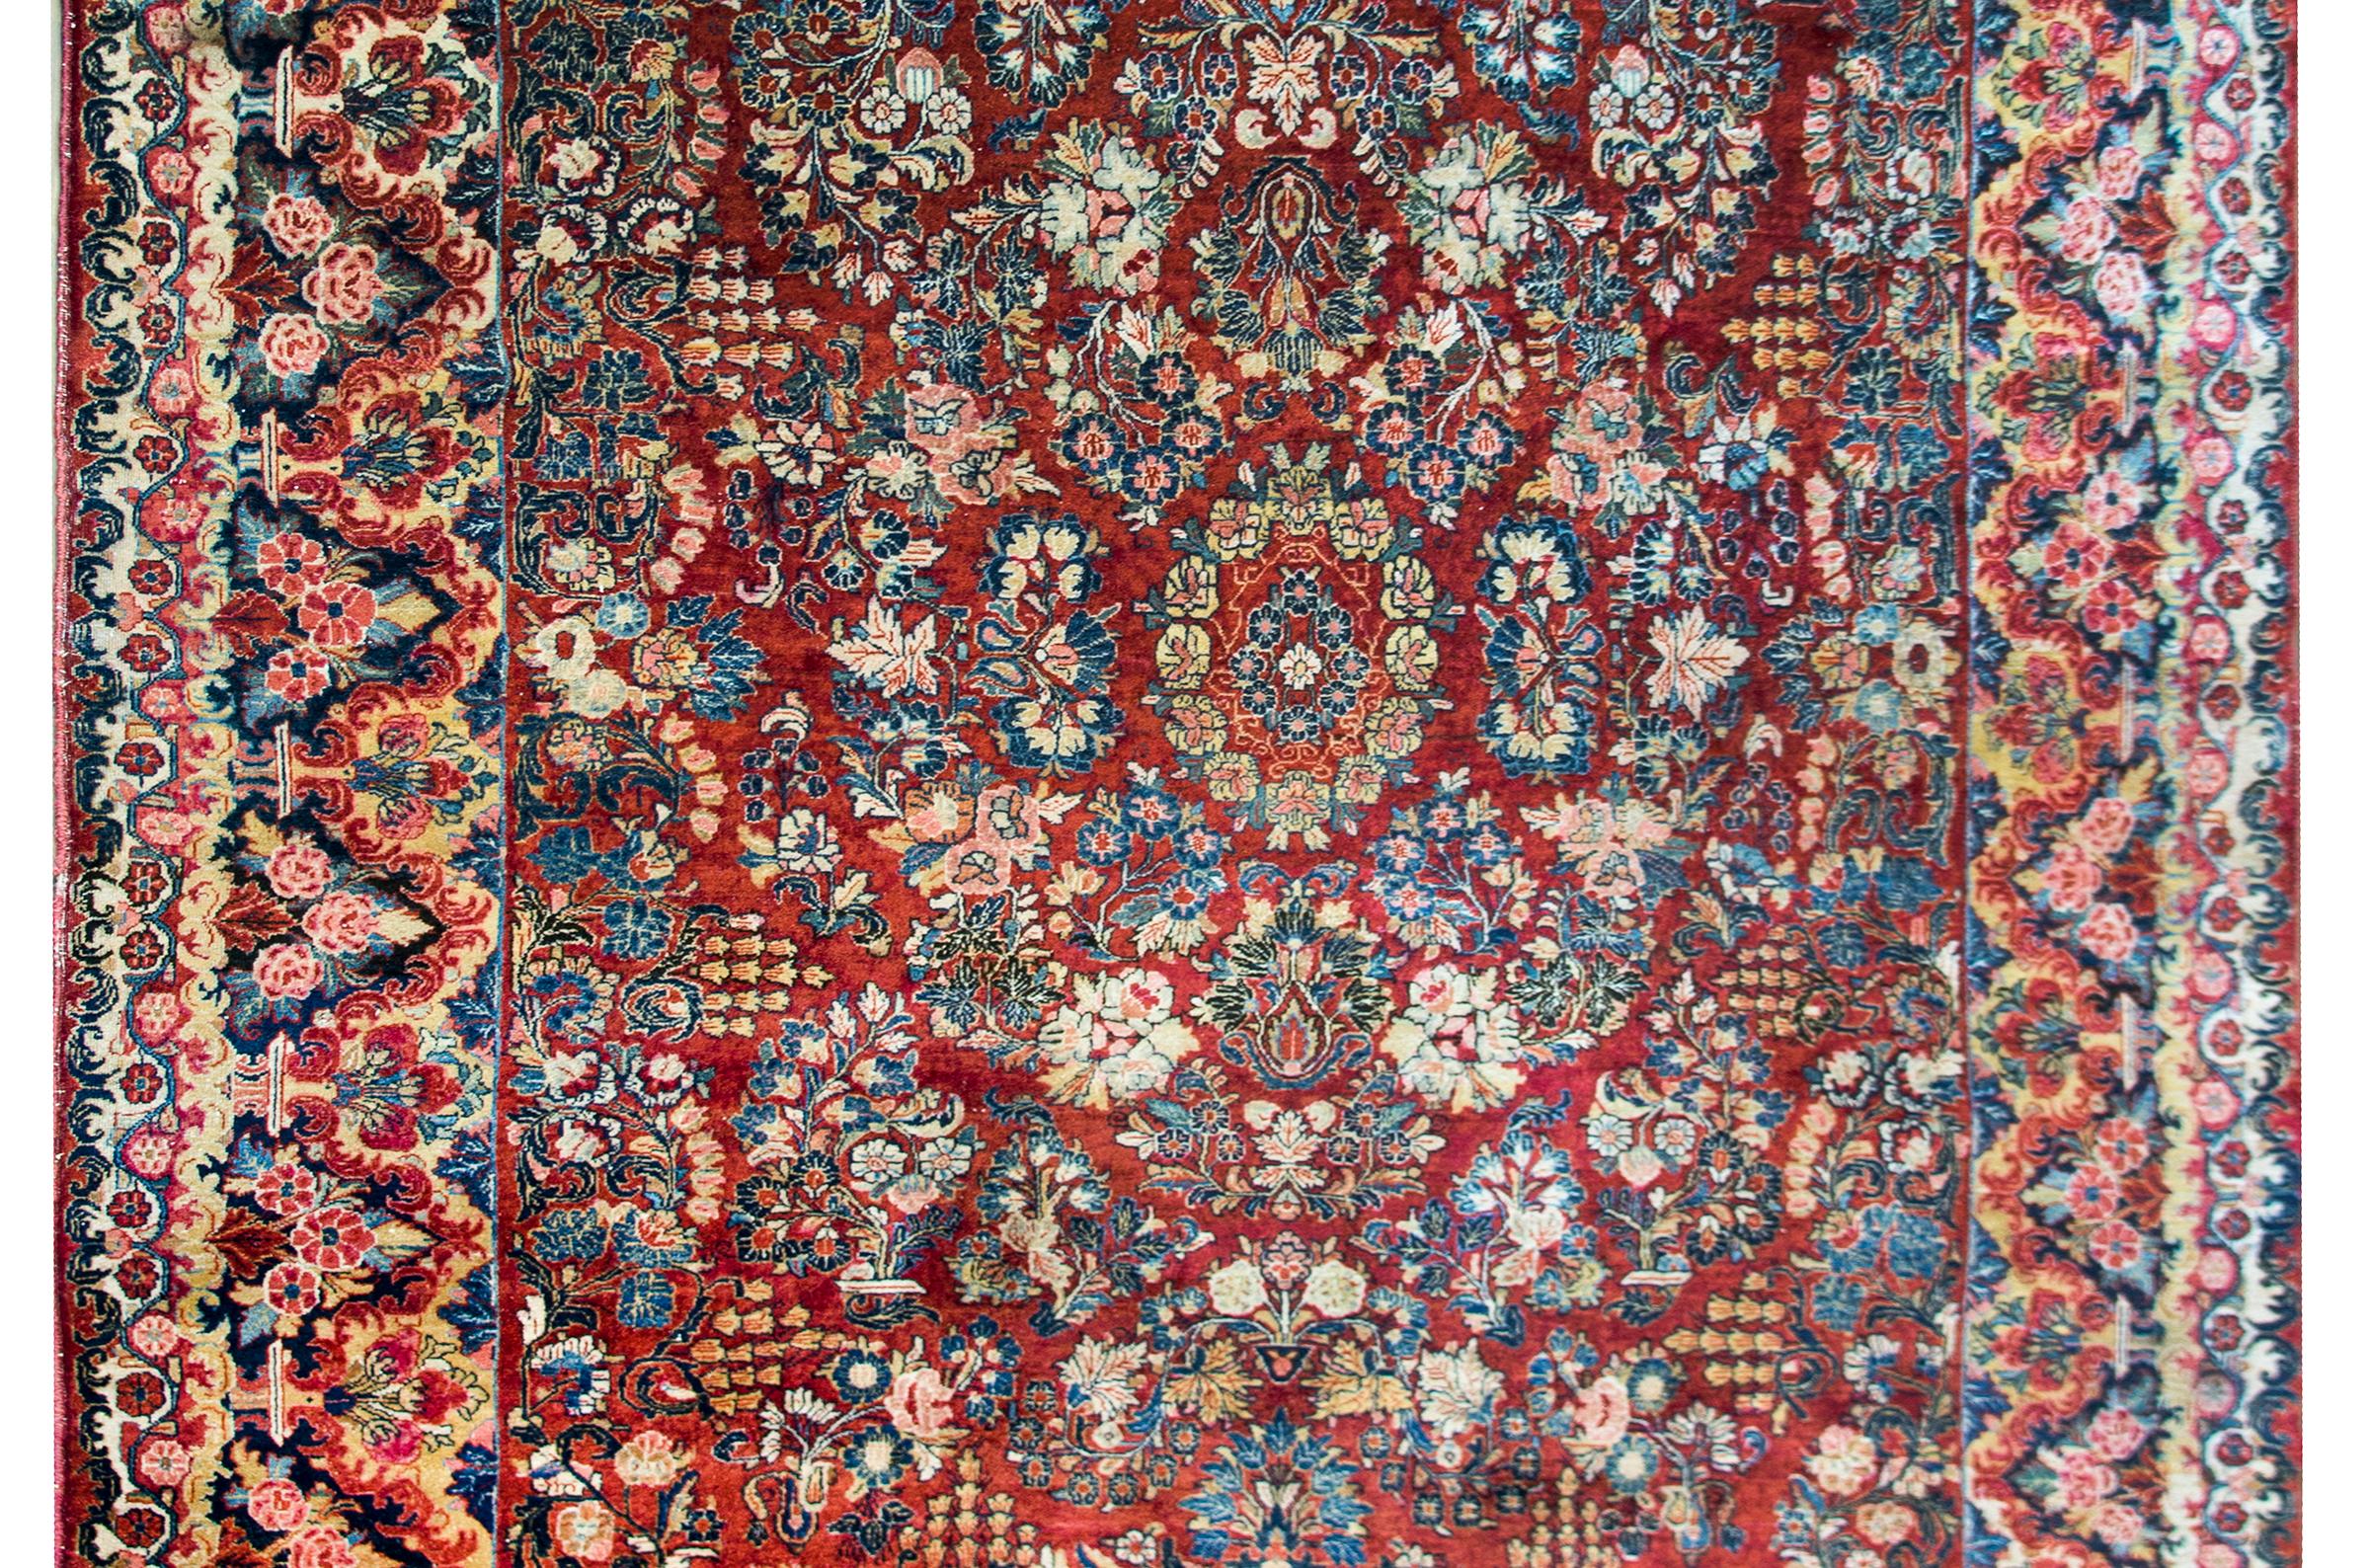 An incredible early 20th century Persian Sarouk rug with the most wonderful all--over floral cluster pattern covering the field, and surrounded by one of the most beautiful borders we've seen in a long time.